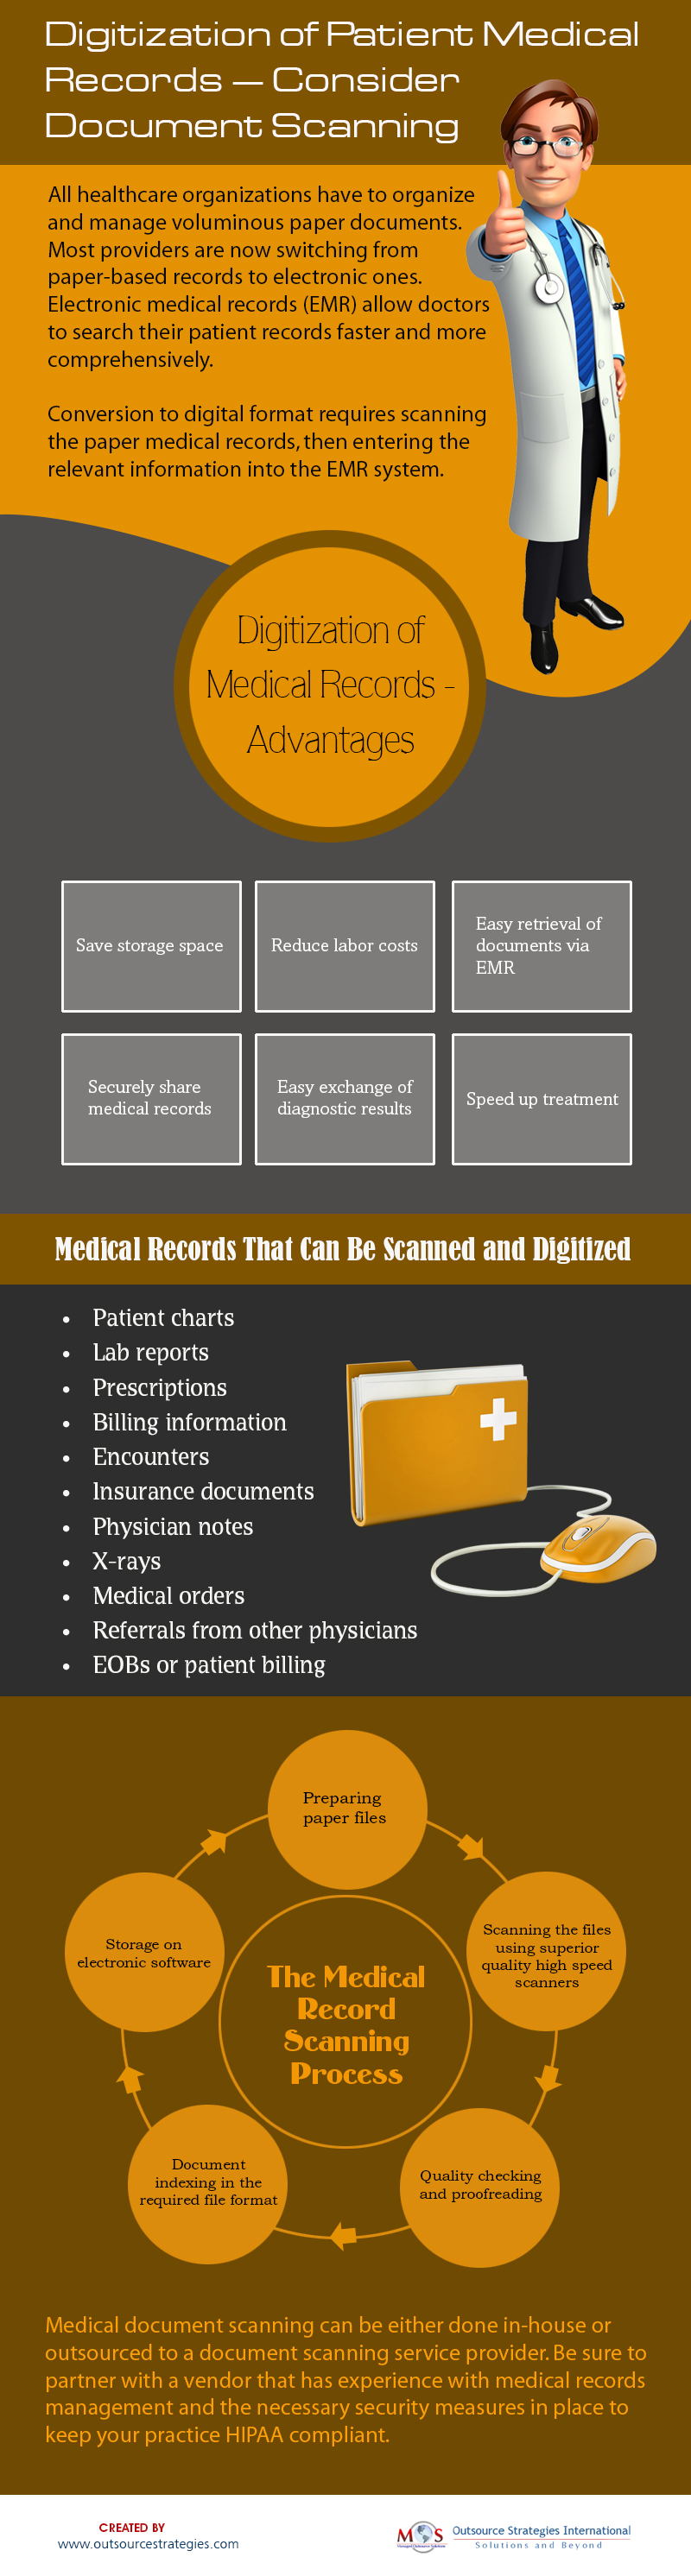 Digitization of Patient Medical Records